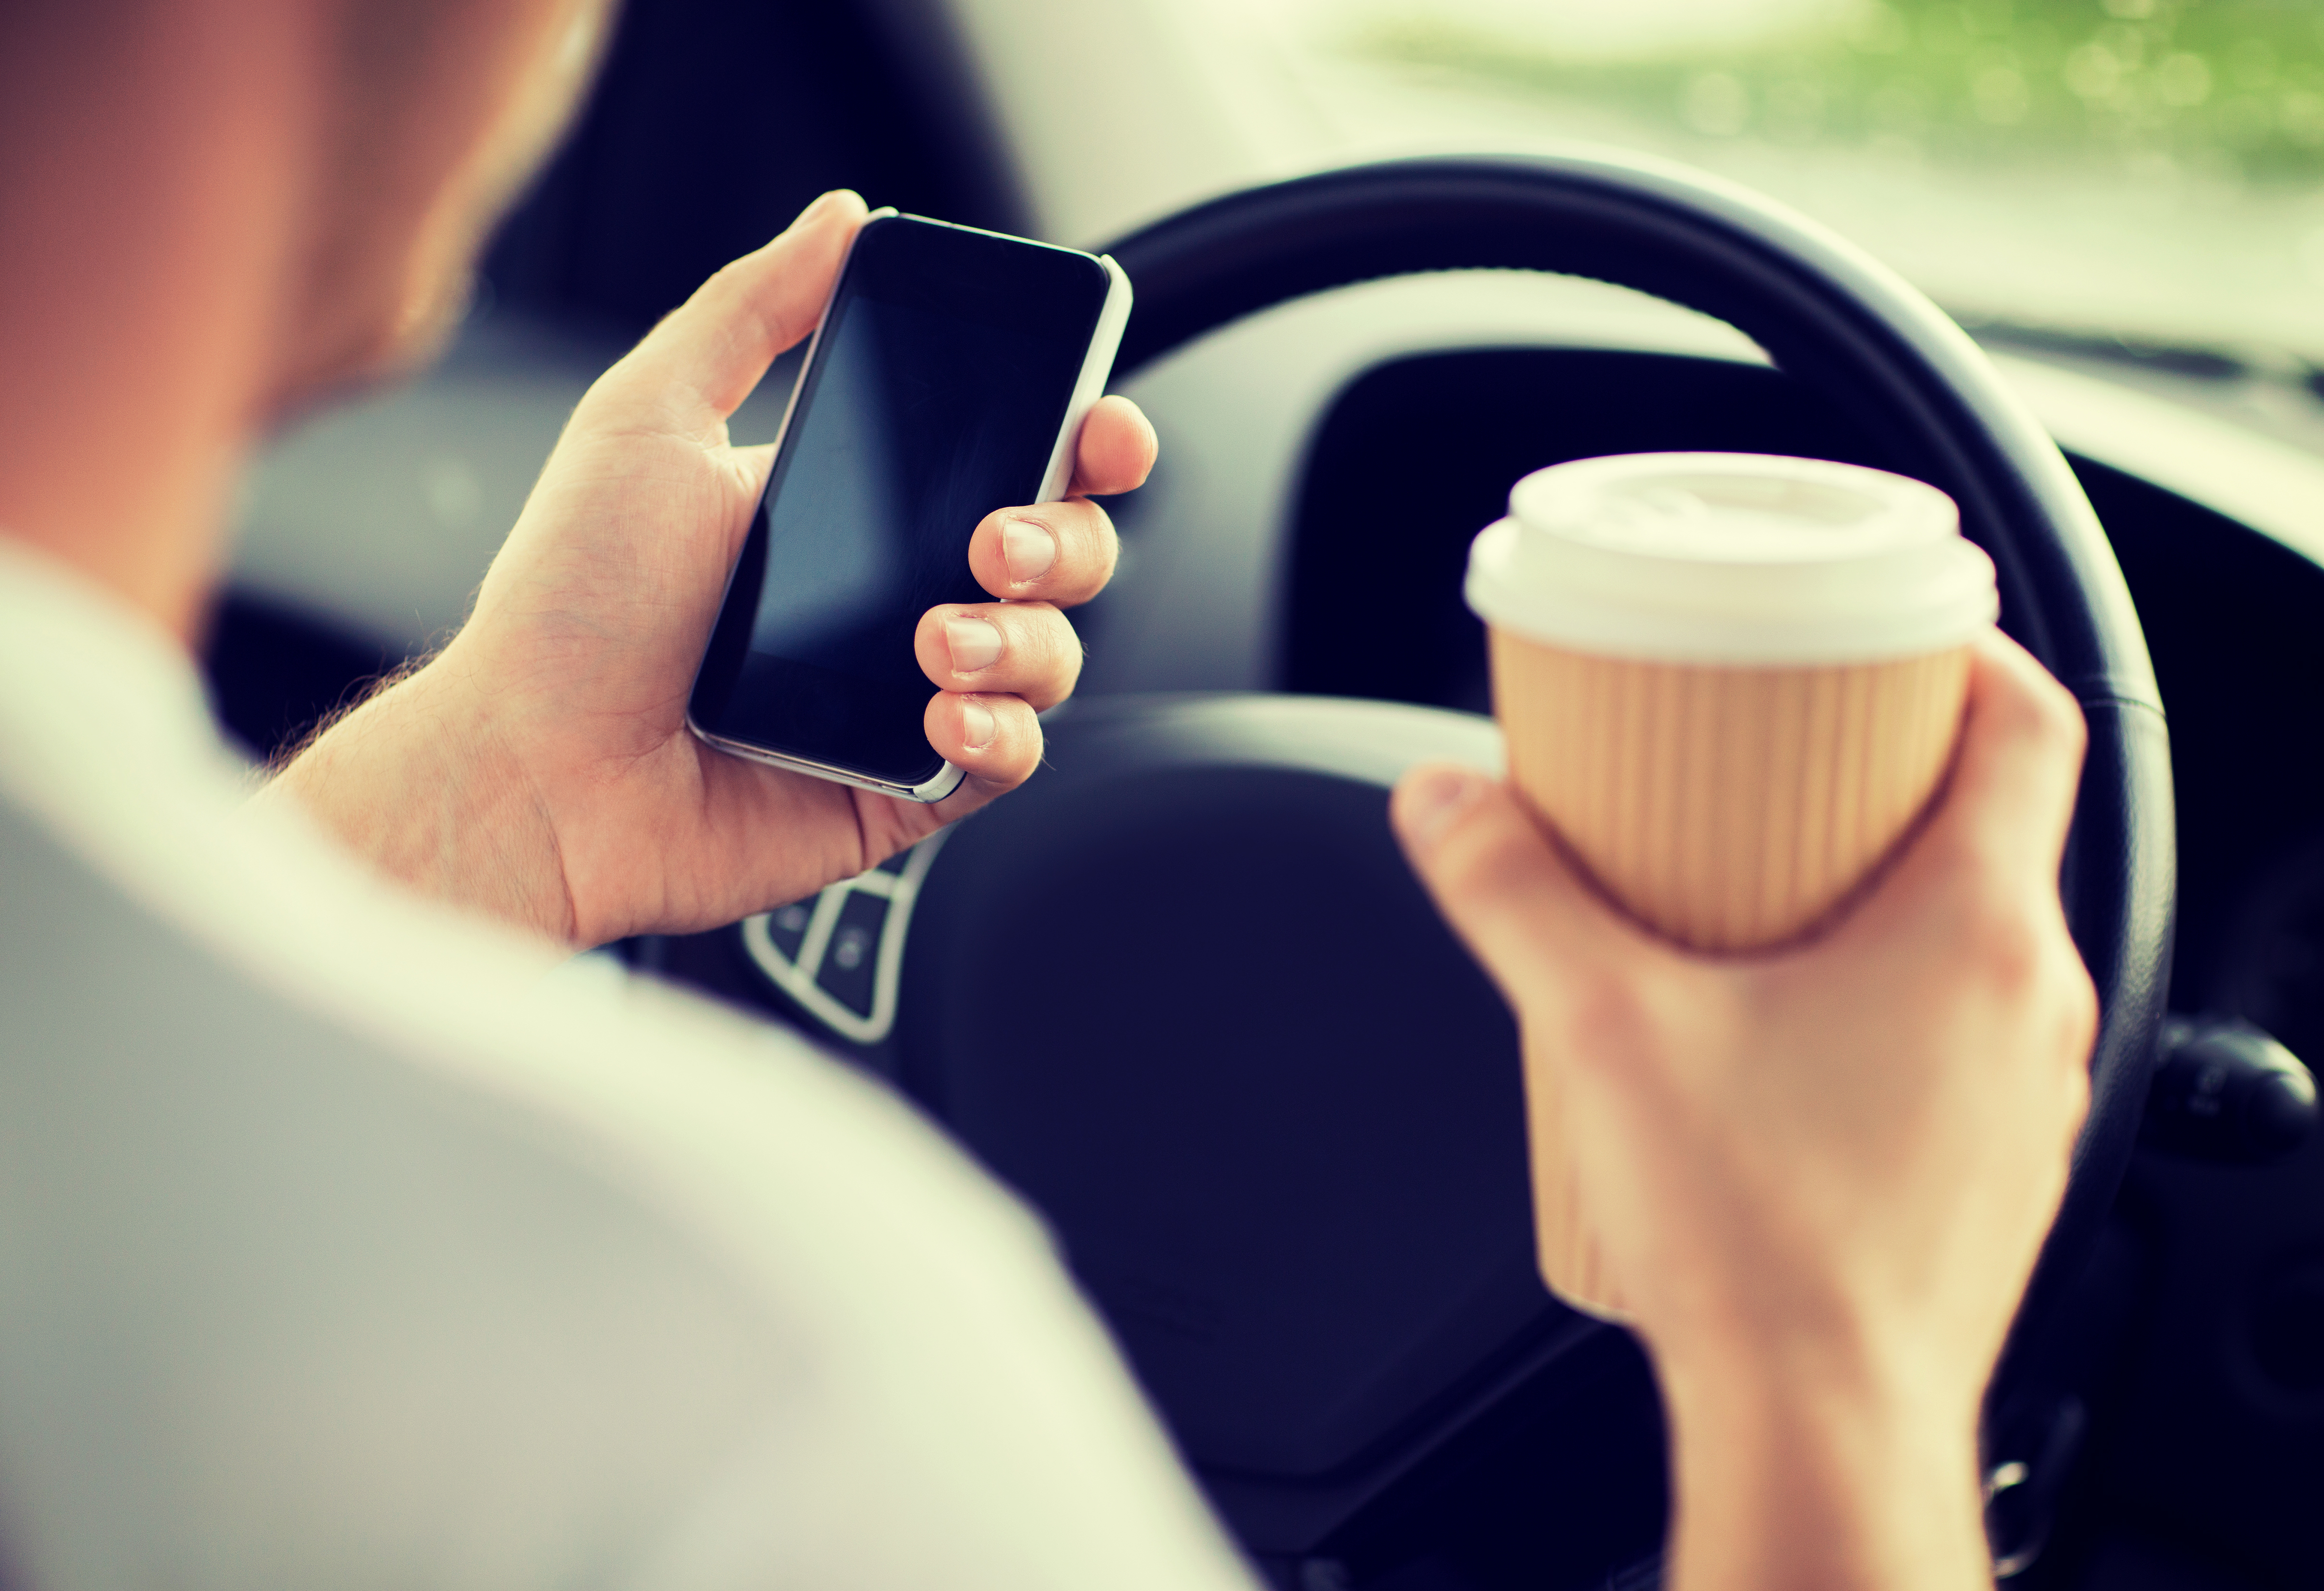 The dangers of distracted driving: Staying safe on the road